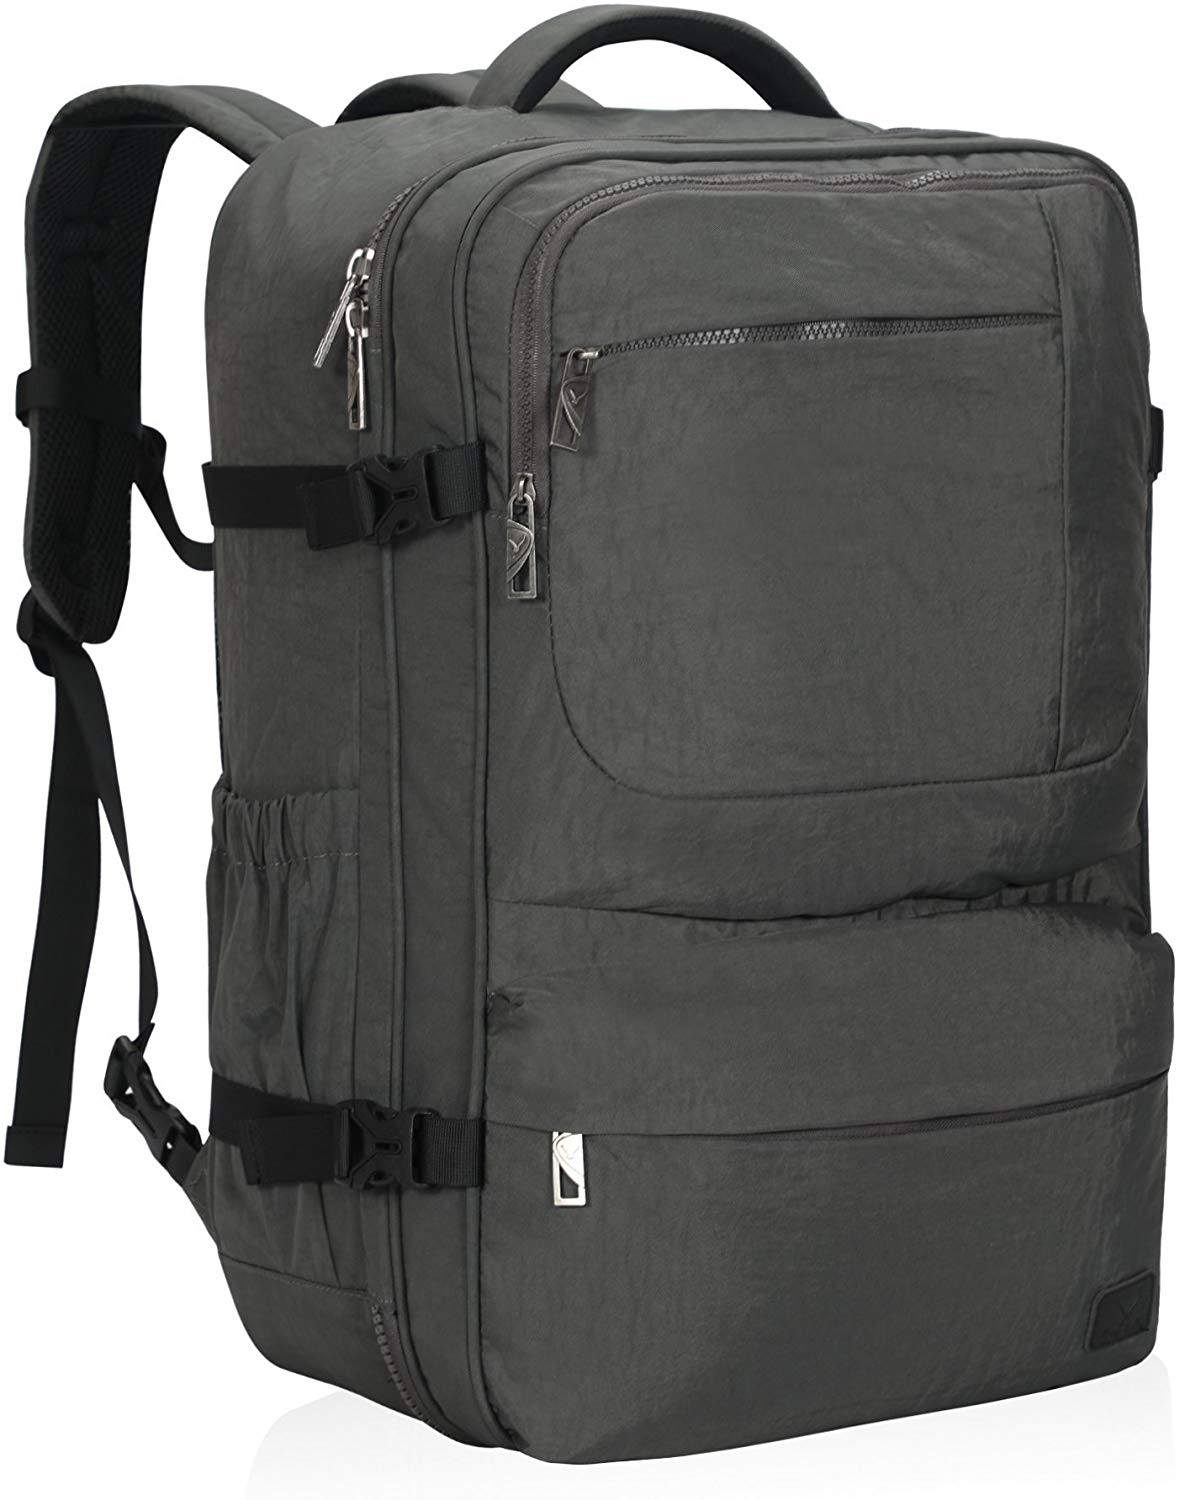 Top 8 High Sierra Academy Backpack Review - Brand Review